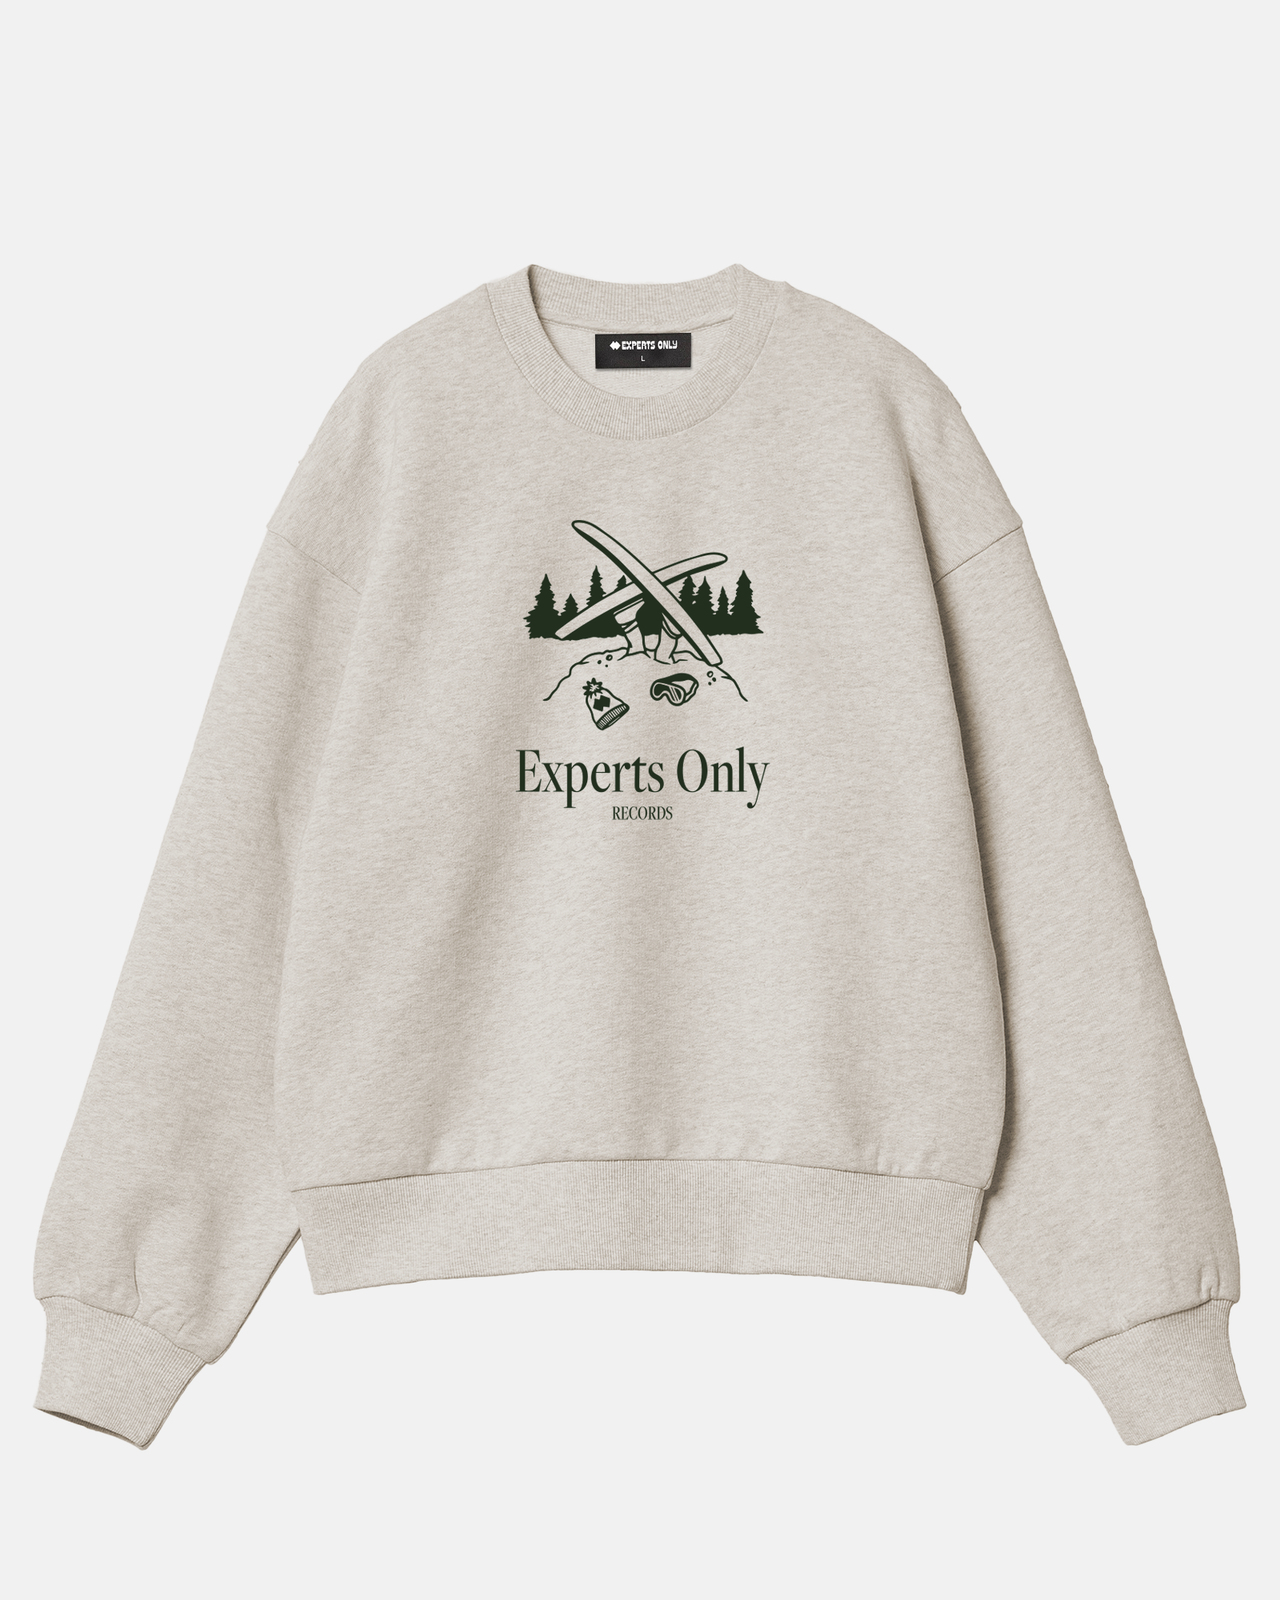 Experts Only Yard Sale Crewneck